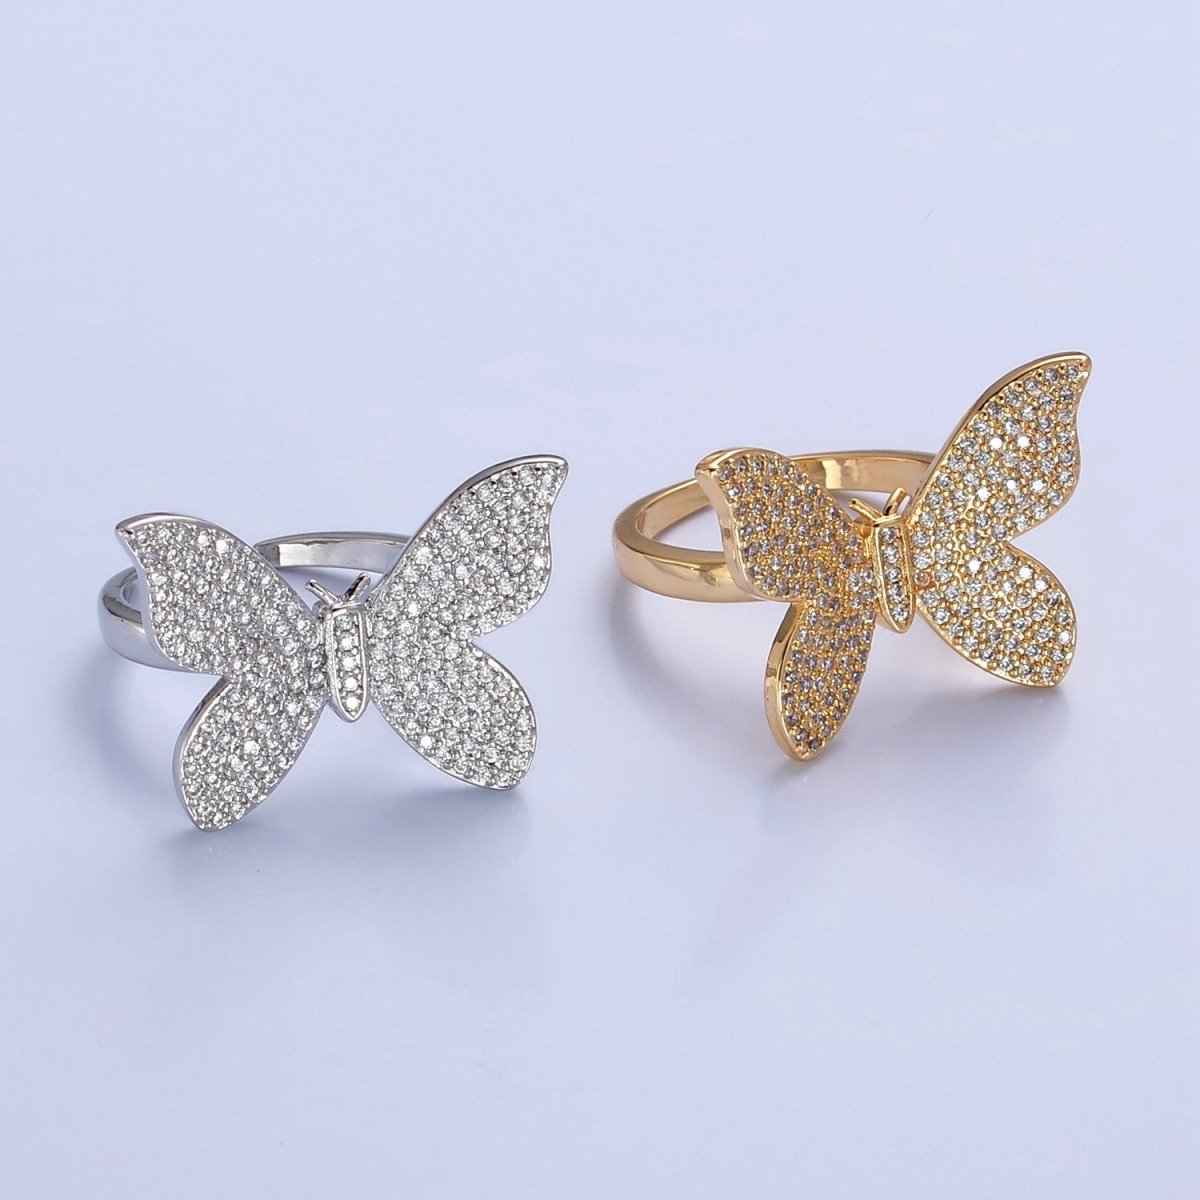 Statement Big Mariposa Ring Gold Pave Silver Butterfly Ring Open Adjustable Jewelry O-2229 O-2230 - DLUXCA